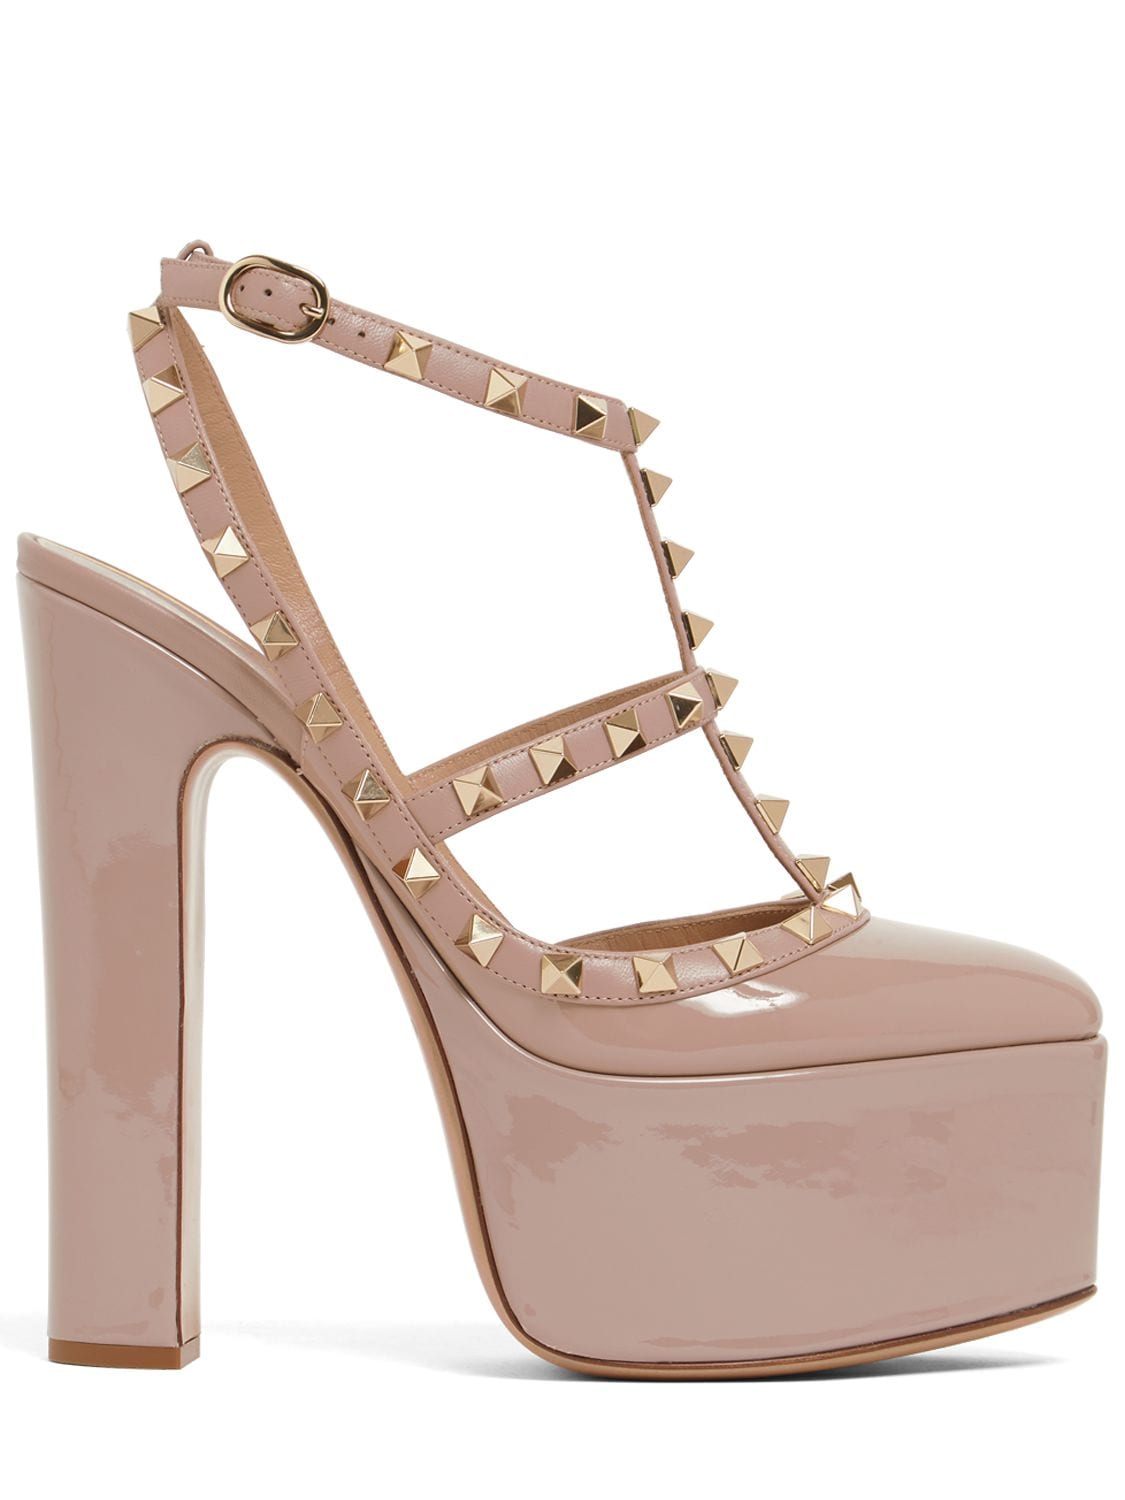 Shop Valentino 155mm Rockstud Patent Leather Sandals In Poudre